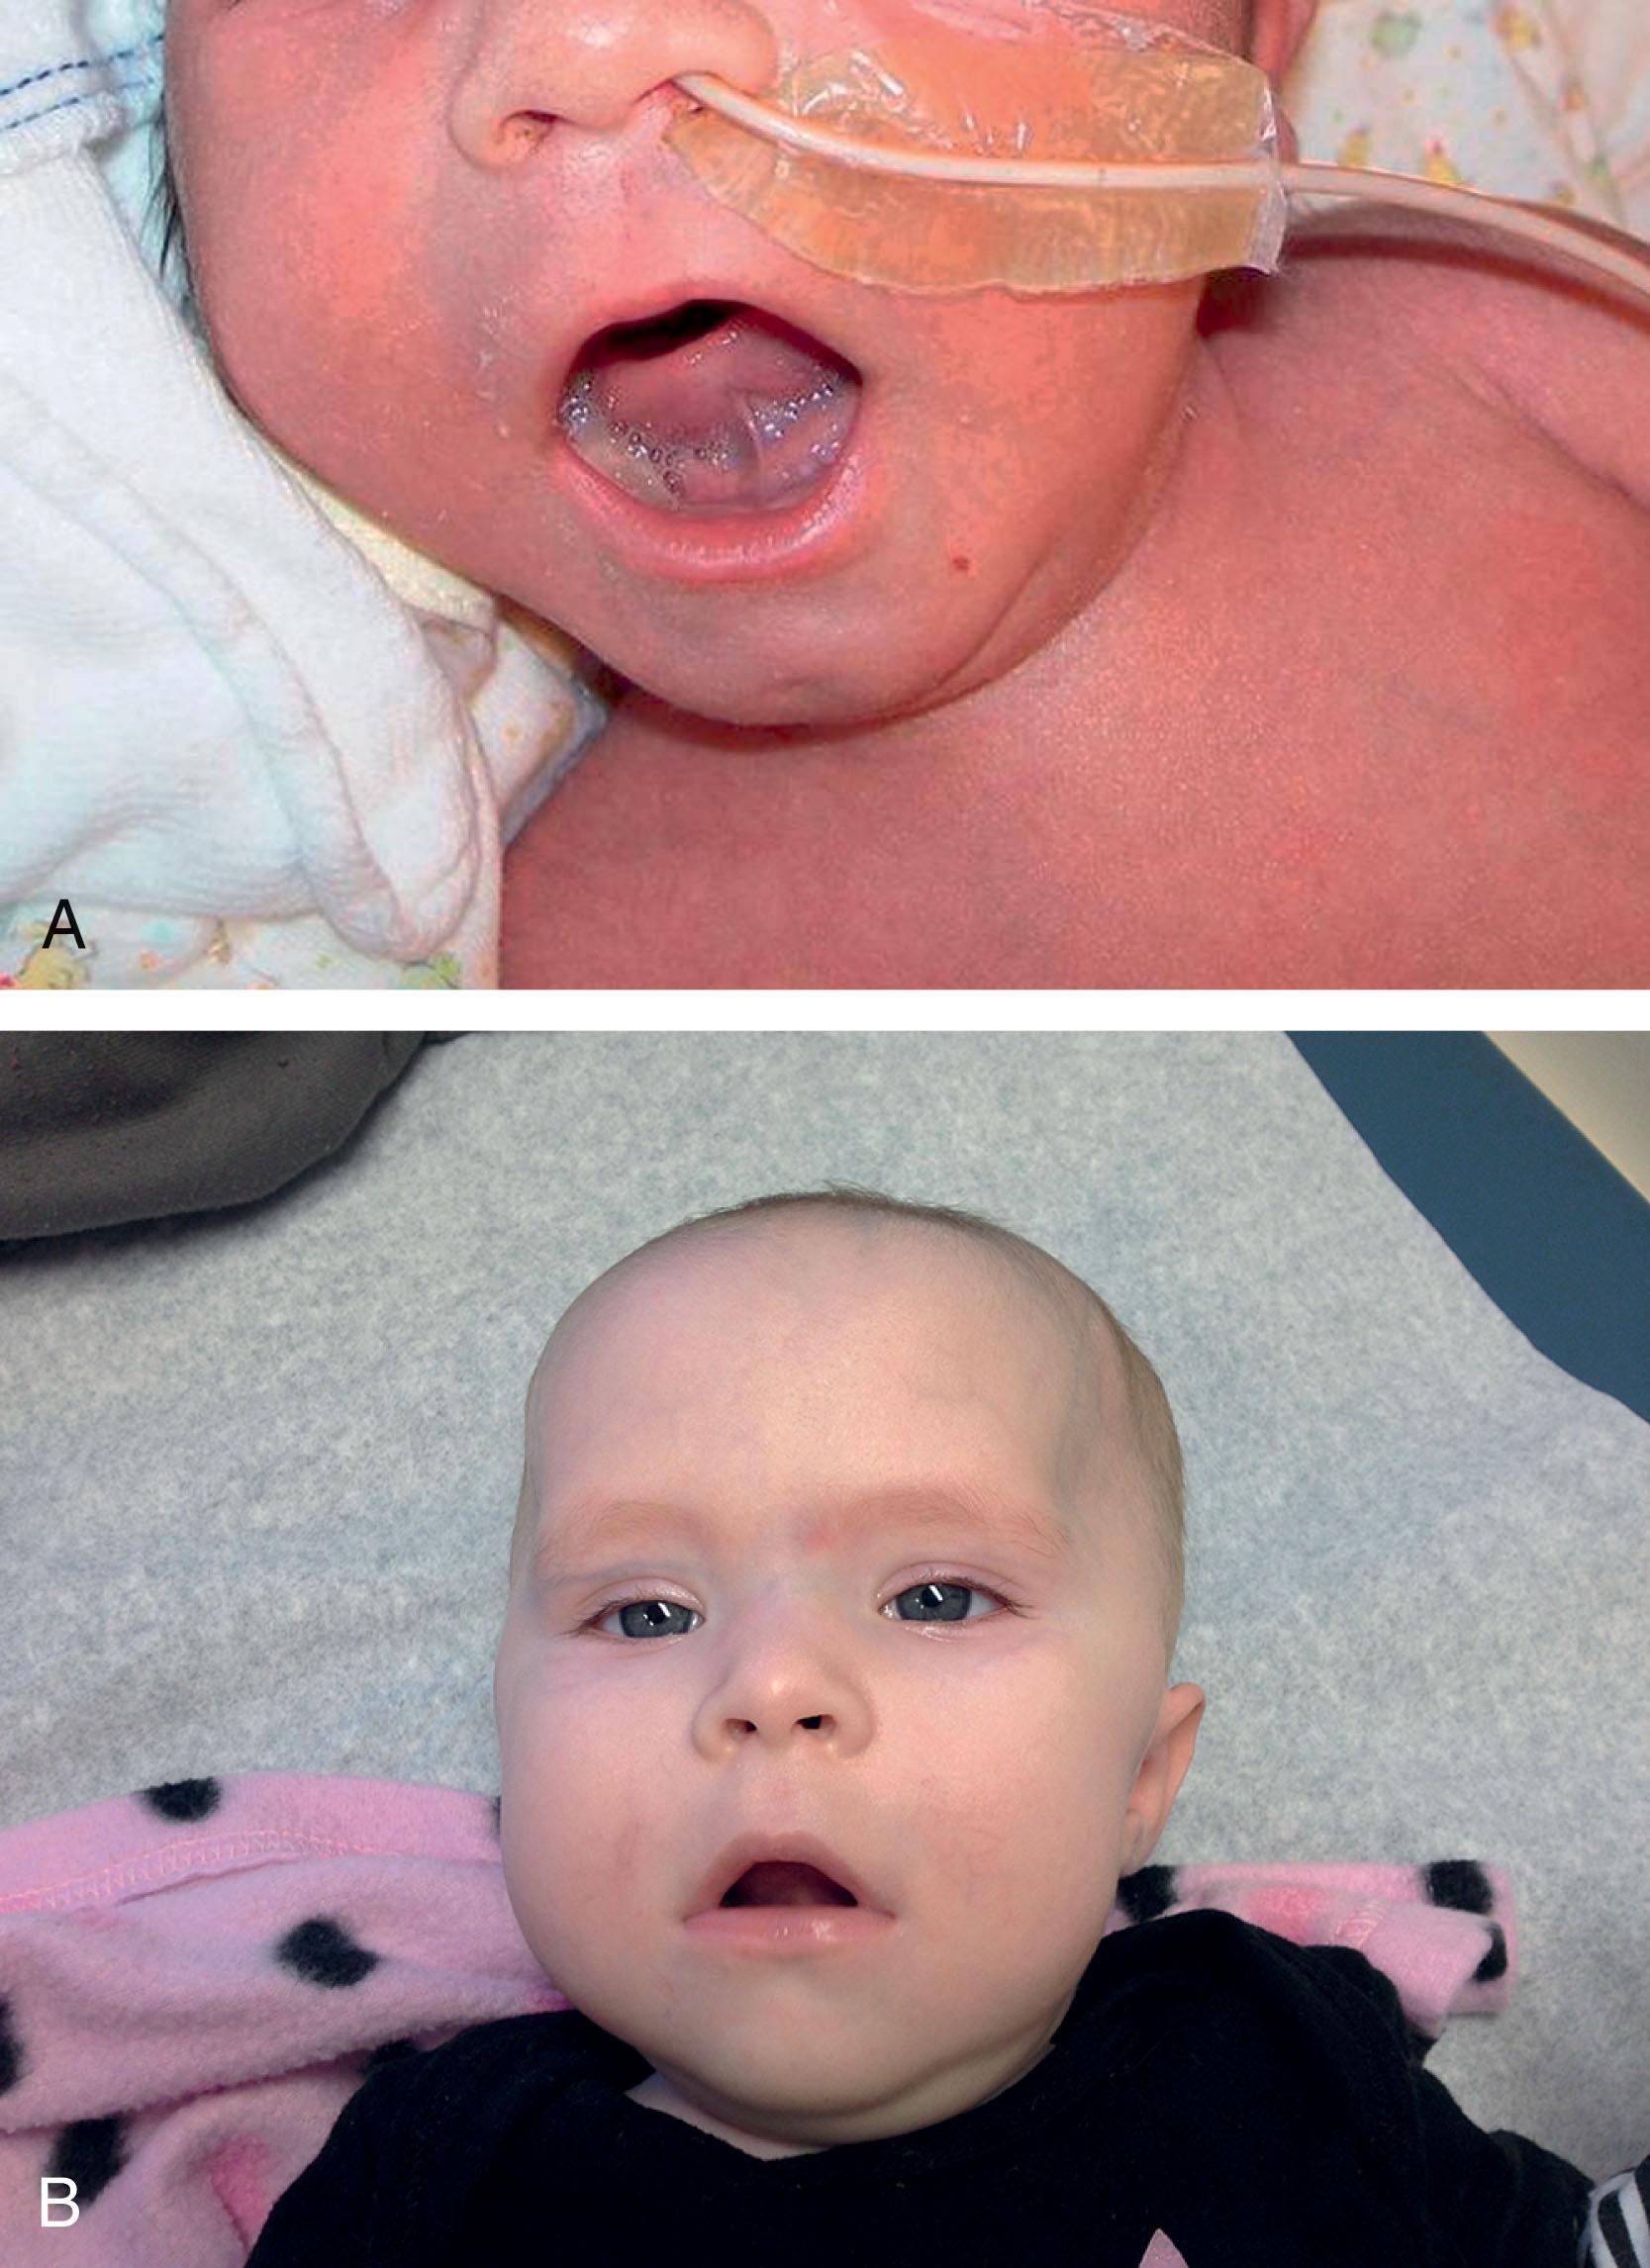 Fig. 37.1, Congenital myotonic dystrophy: facial appearance in the neonatal and infantile period . (A) Note the facial diplegia with tent-shaped appearance of upper lip in this newborn. (B) Same affected infant at an older age; note the facial diplegia, tented upper lip, and temporalis muscle atrophy.